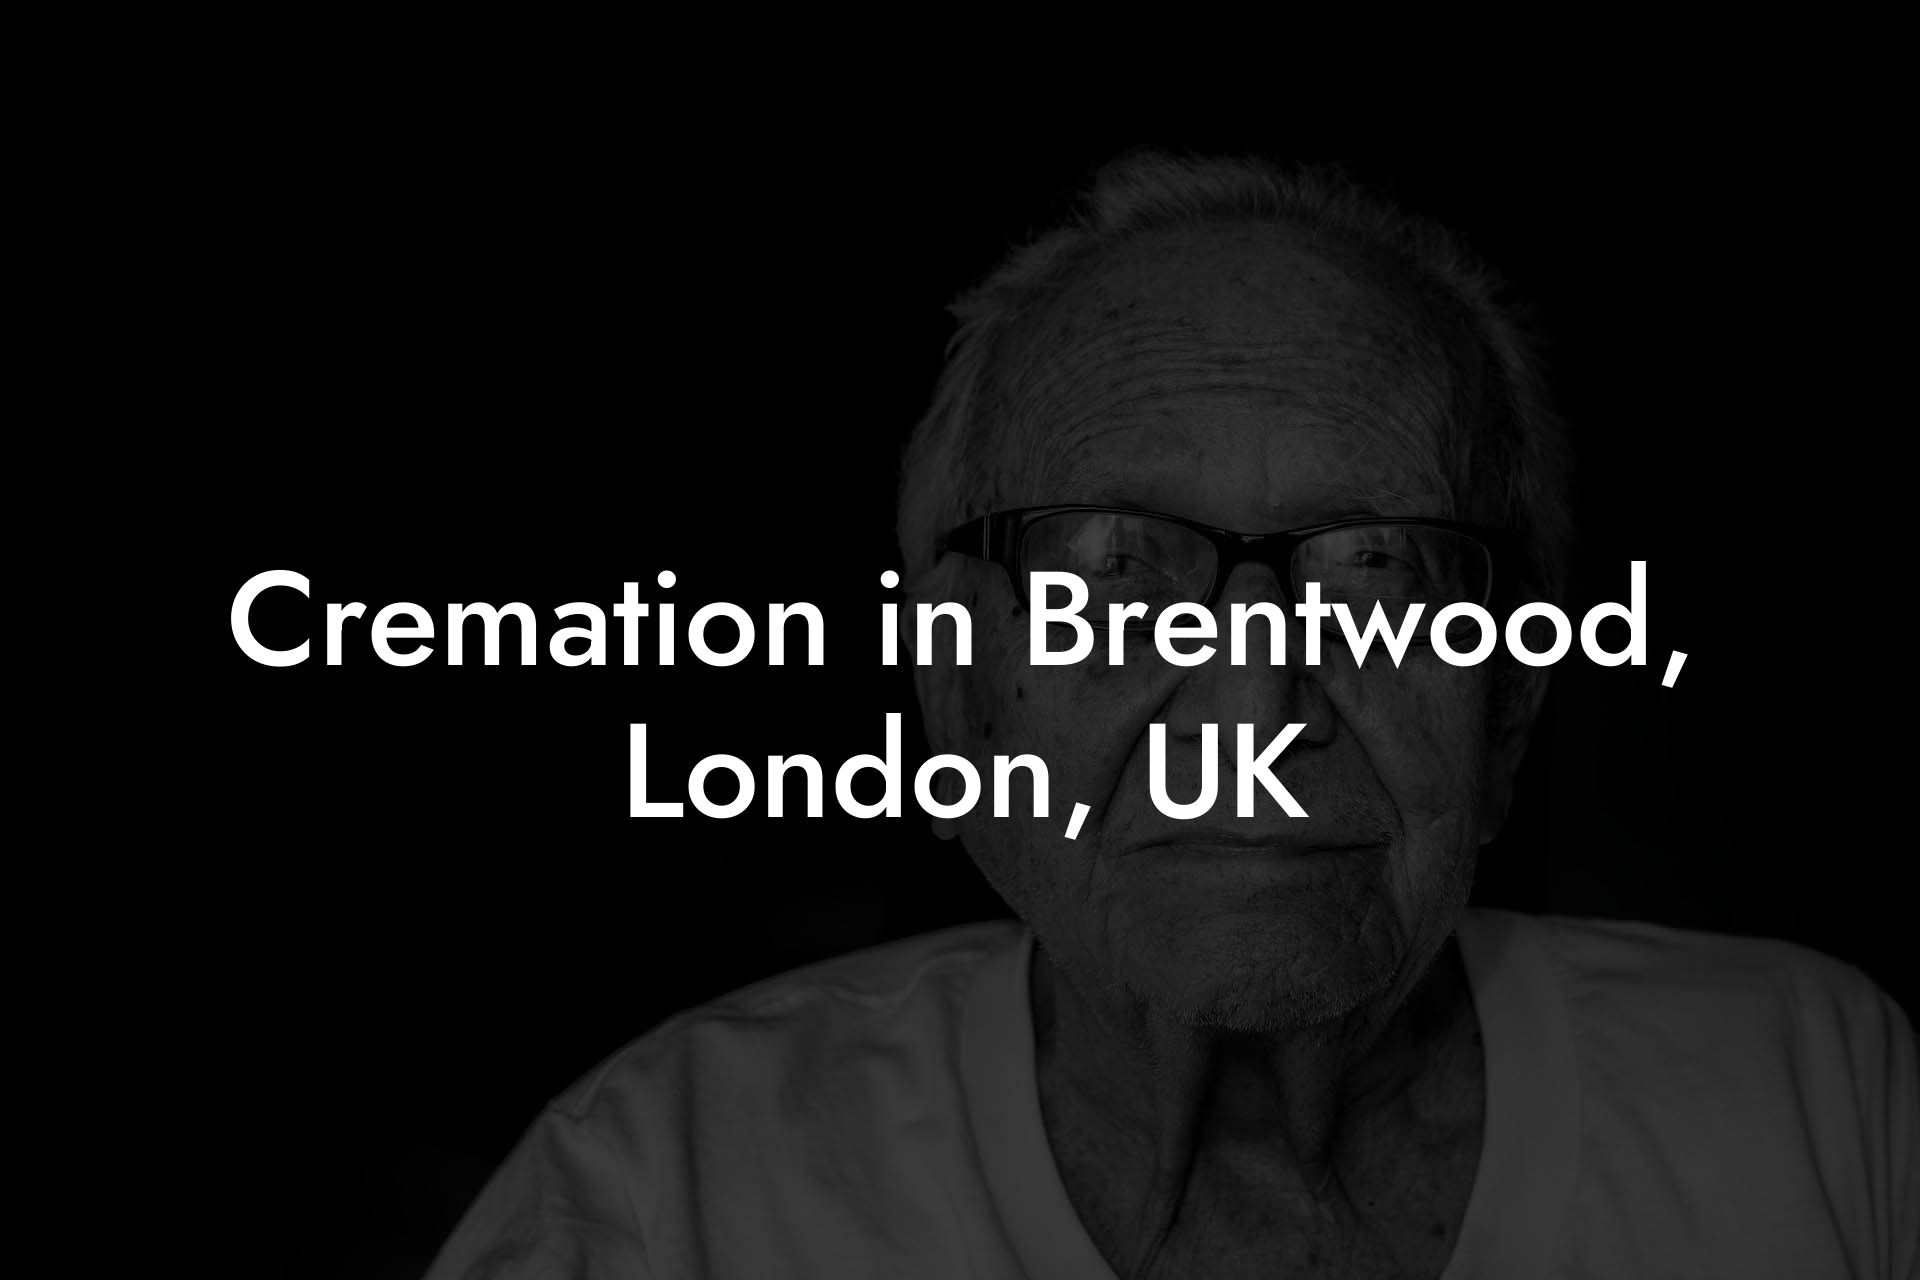 Cremation in Brentwood, London, UK